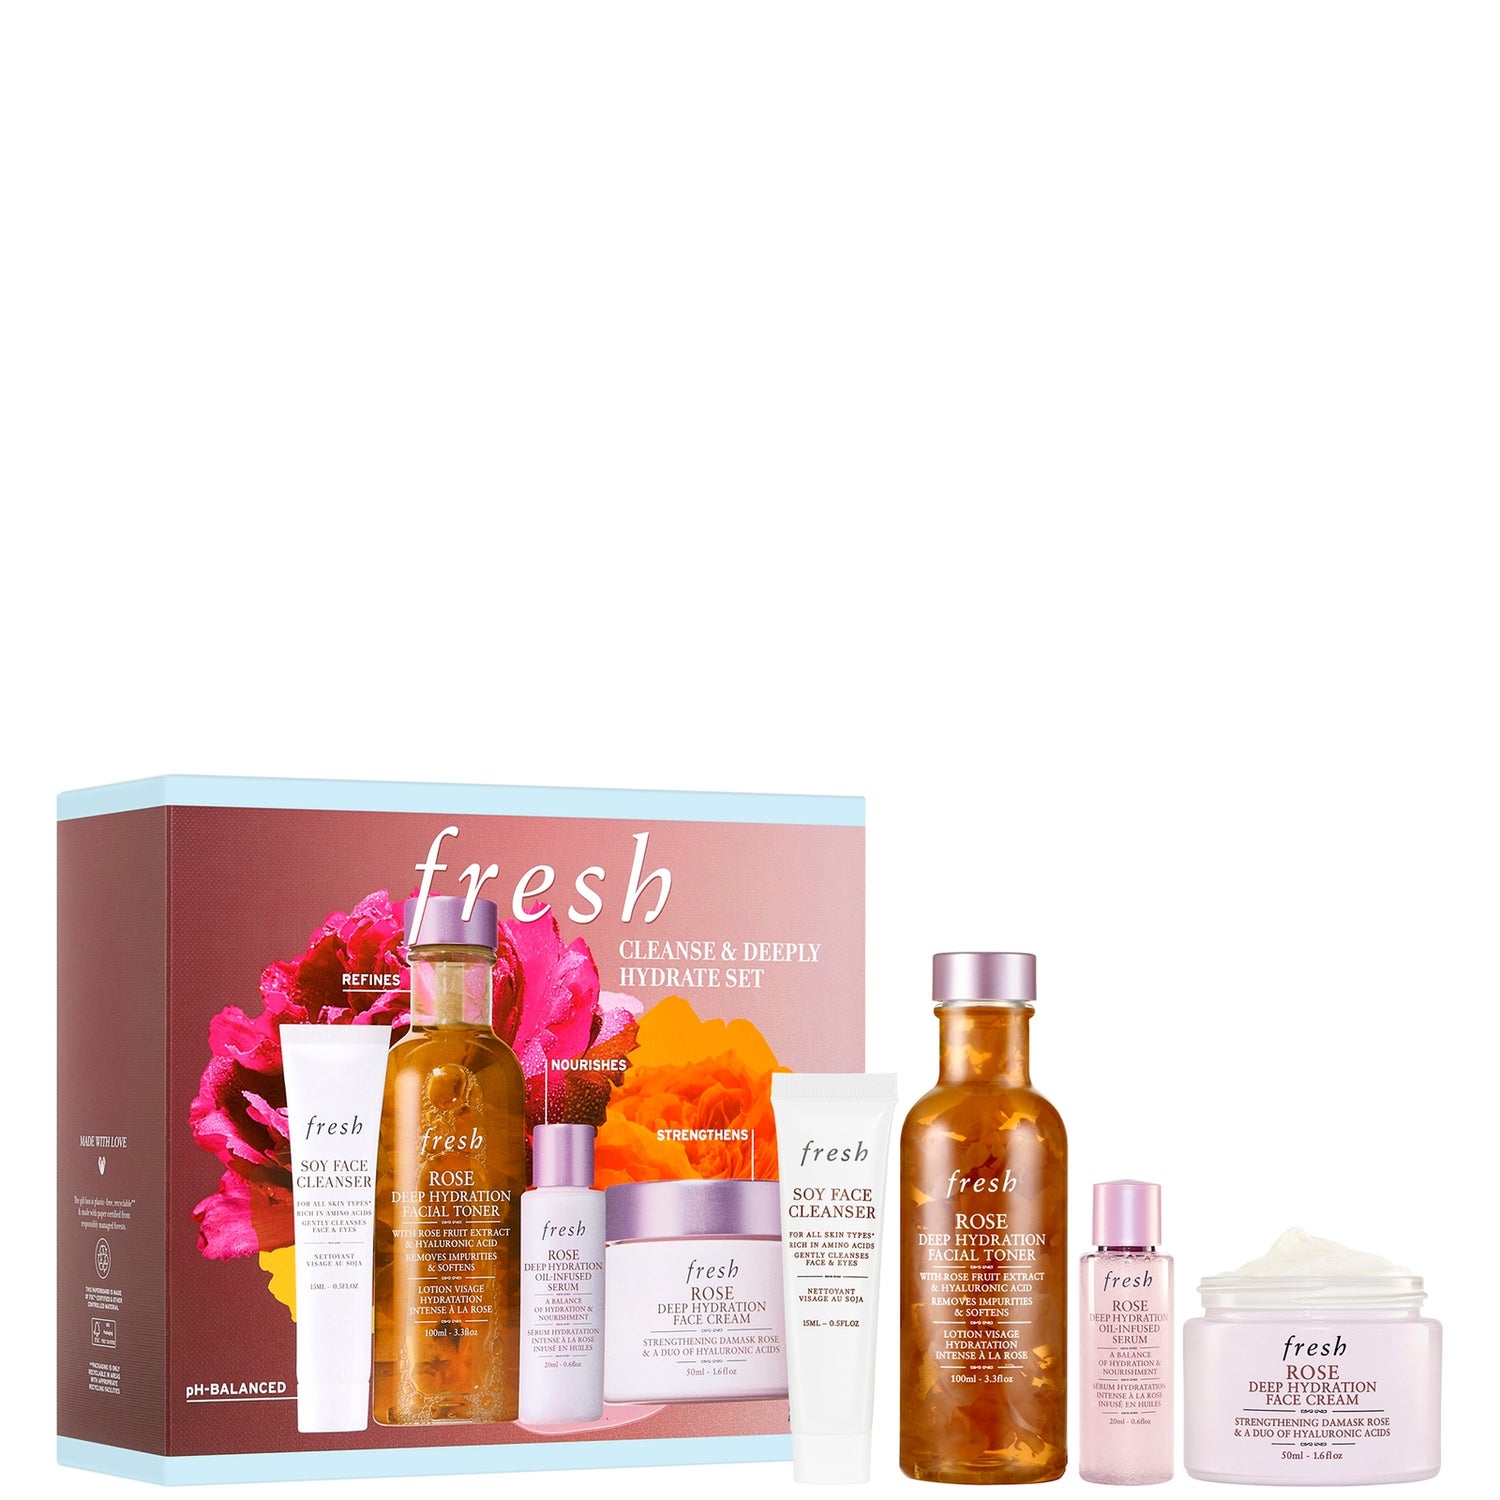 Fresh Cleanse & Deeply Hydrate Gift Set (Worth £82)